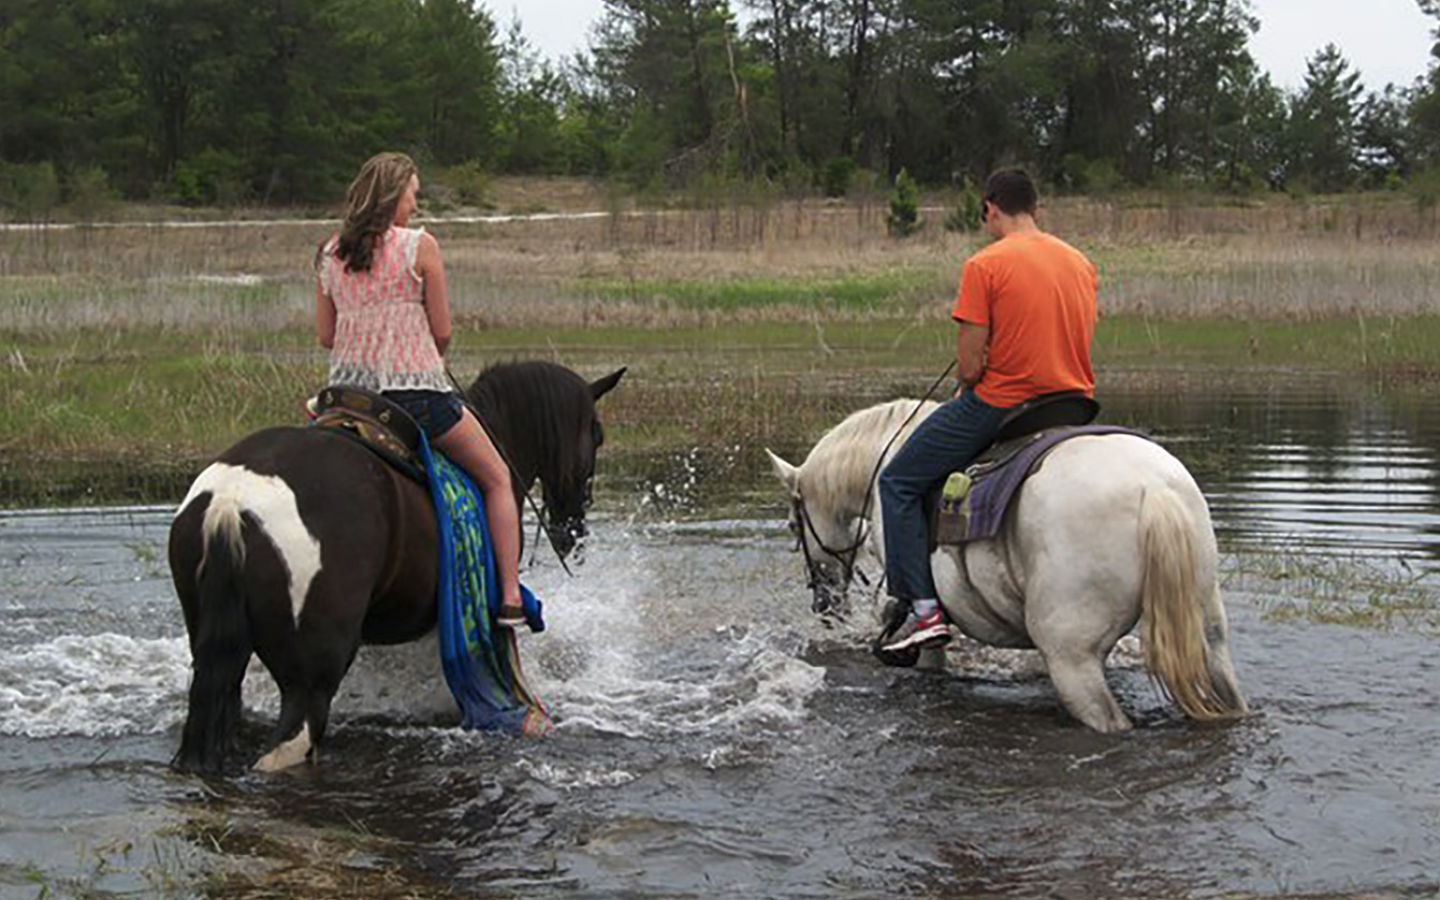 a man and woman, on individual horses, wading throw shallow water